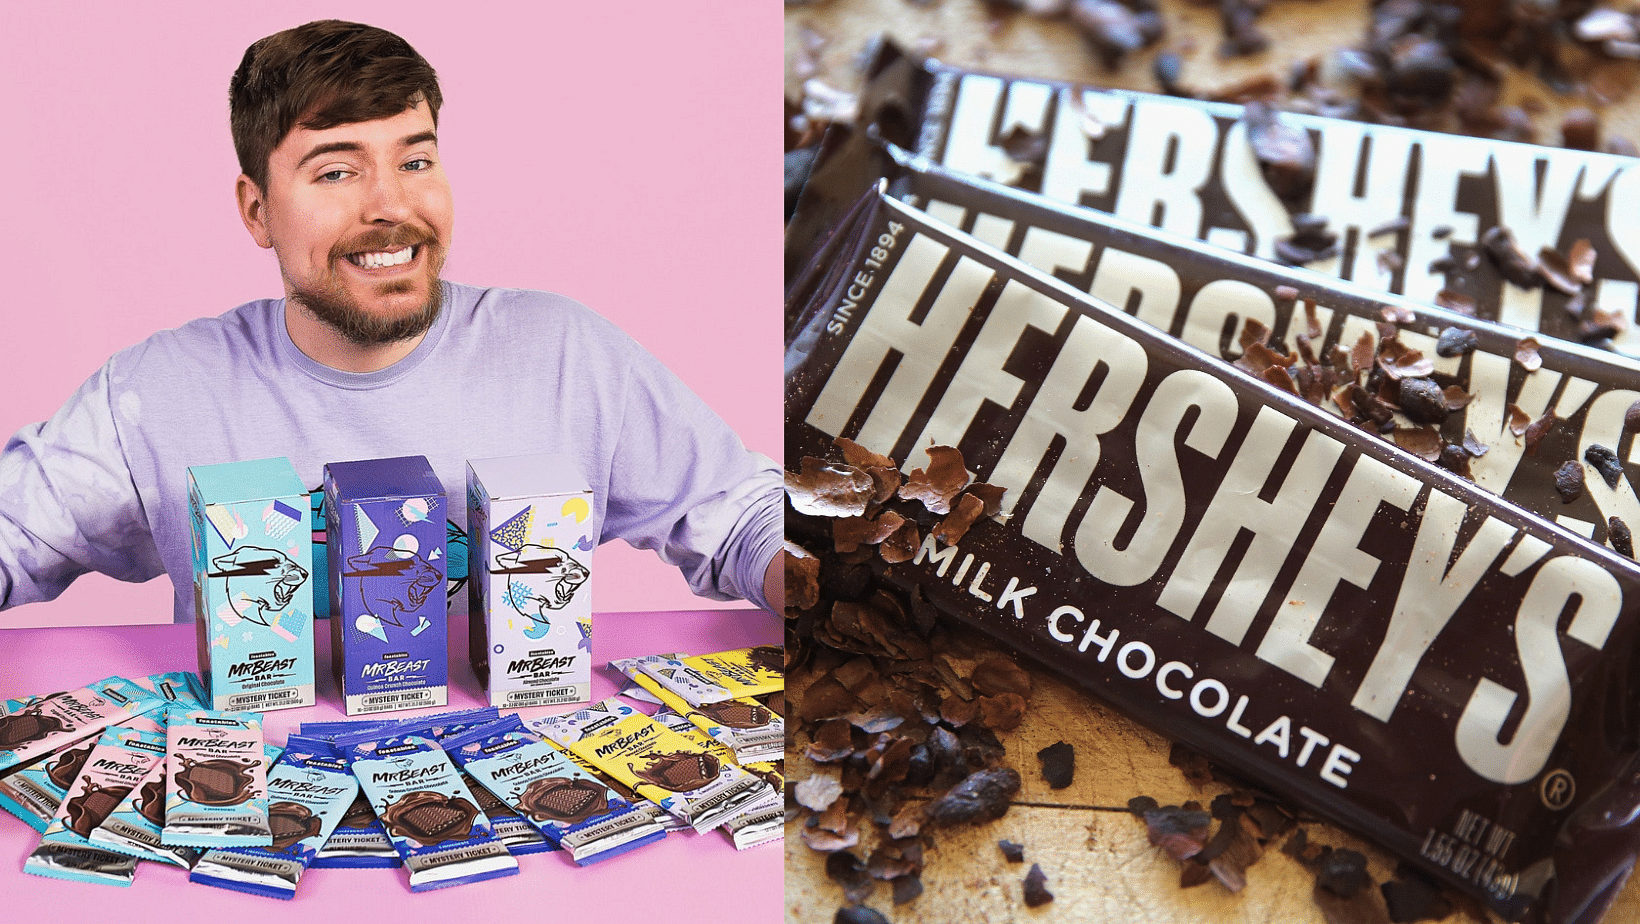 MrBeast Feastables Emerges as a Tough Competitor to the Renowned Hershey's  - The SportsRush